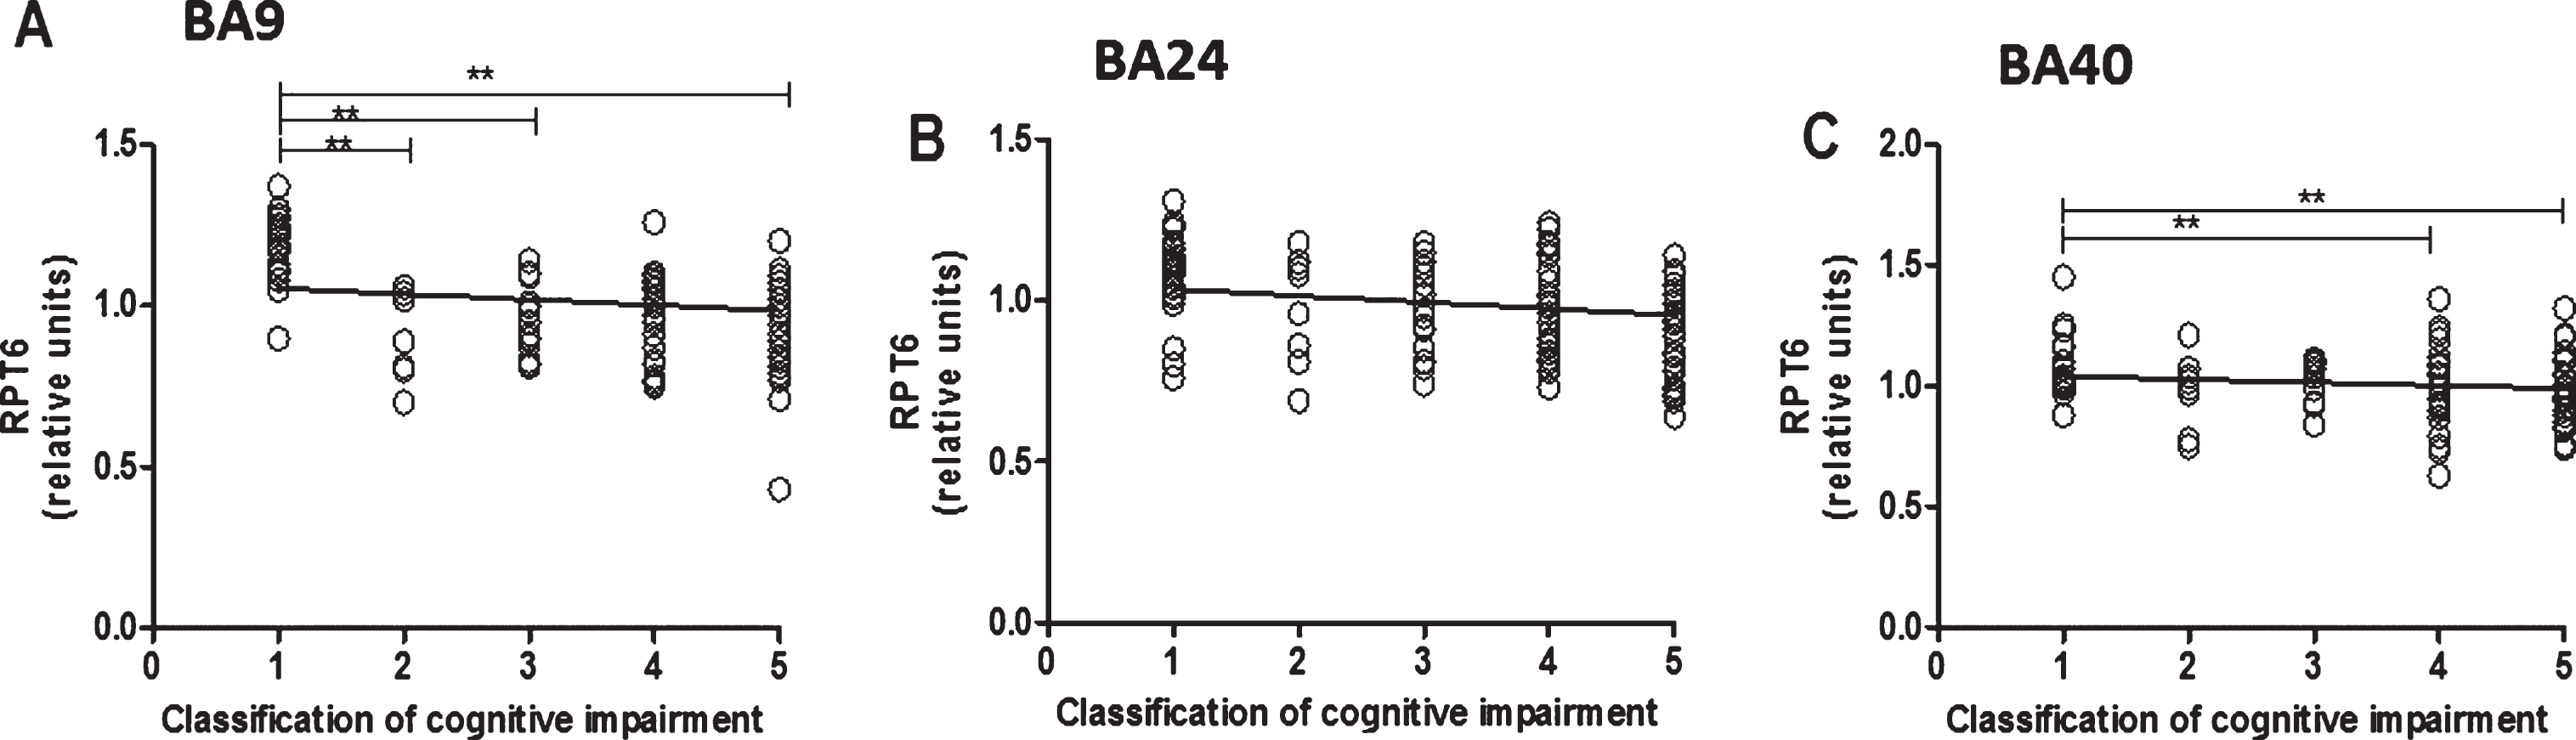 Relationship between RPT6 expression levels and cognitive impairment based upon MMSE classification. 19S ATPase RPT6, proteasome sub-unit values protein levels in BA9, BA24, and BA40 predicted cognitive impairment. Regression analysis showed RPT6 levels in BA9, BA24, and BA40 of control, DLB, PDD, and AD to be significant predictors of the cognitive impairment category ([BA9] R2 = 0.297, beta = –0.545, degree of freedom [df] = 1, 102, t = –6.571, p = 0.001, [BA24] R2 = 0.04, beta = –0.206, df = 1, 99, t = –2.09, p = 0.039, [BA40] R2 = 0.180, beta = –0.425, df = 1, 105, t = –4.807, p = 0.001]. The analysis of variance (ANOVA) for the model was significant (p = 0.0001). The difference in mean RPT6 levels between cognitive impairment groups was analyzed by one-way ANOVA and the Bonferroni post hoc test, which revealed RPT6 levels in BA9 to be significantly higher in controls compared with the other groups (one-way ANOVA F = 17.82, d.f.  = 4 and 99, p = 0.001; Bonferroni post hoc test). In BA40, RPT6 levels were significantly lower in people with moderate dementia (10%, p = 0.033) and with severe dementia (19%, p = 0.001) compared with controls. The difference in mean RPT6 levels between cognitive impairment groups in BA24 was not found to be significant (one-way ANOVA p > 0.05). (**p < 0.01).